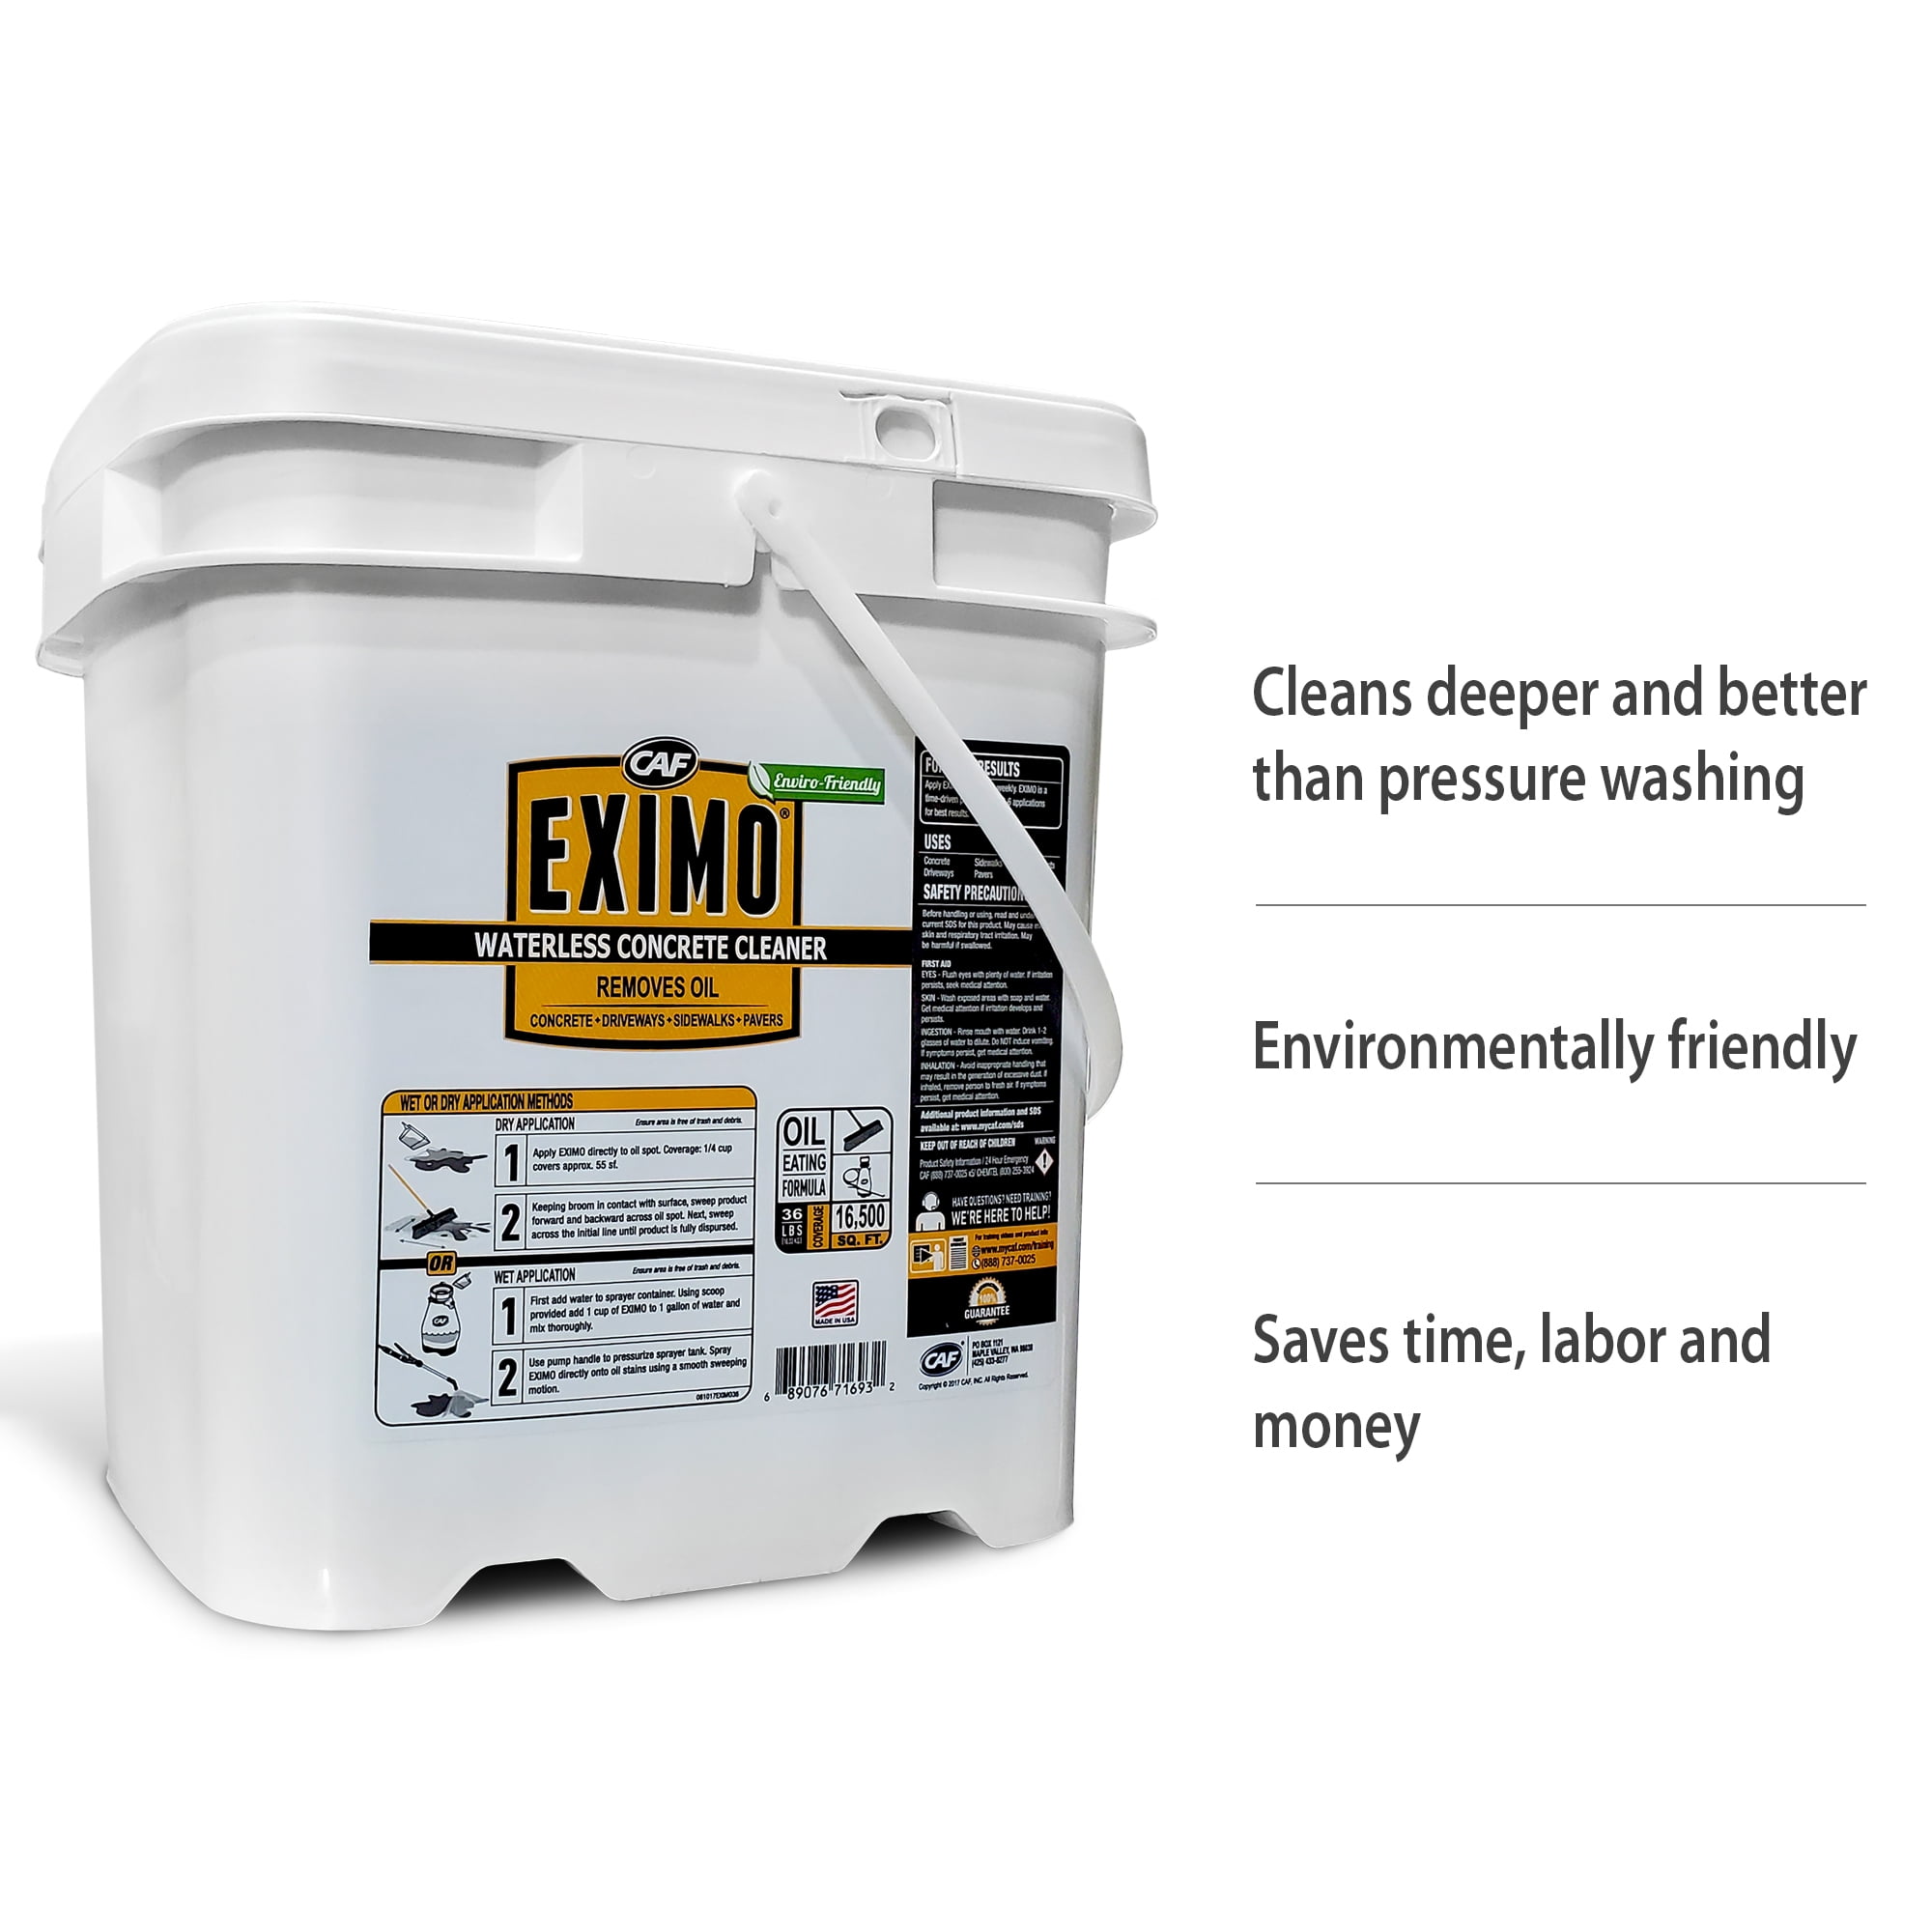 EXIMO® Waterless Concrete Cleaner 18 lbs